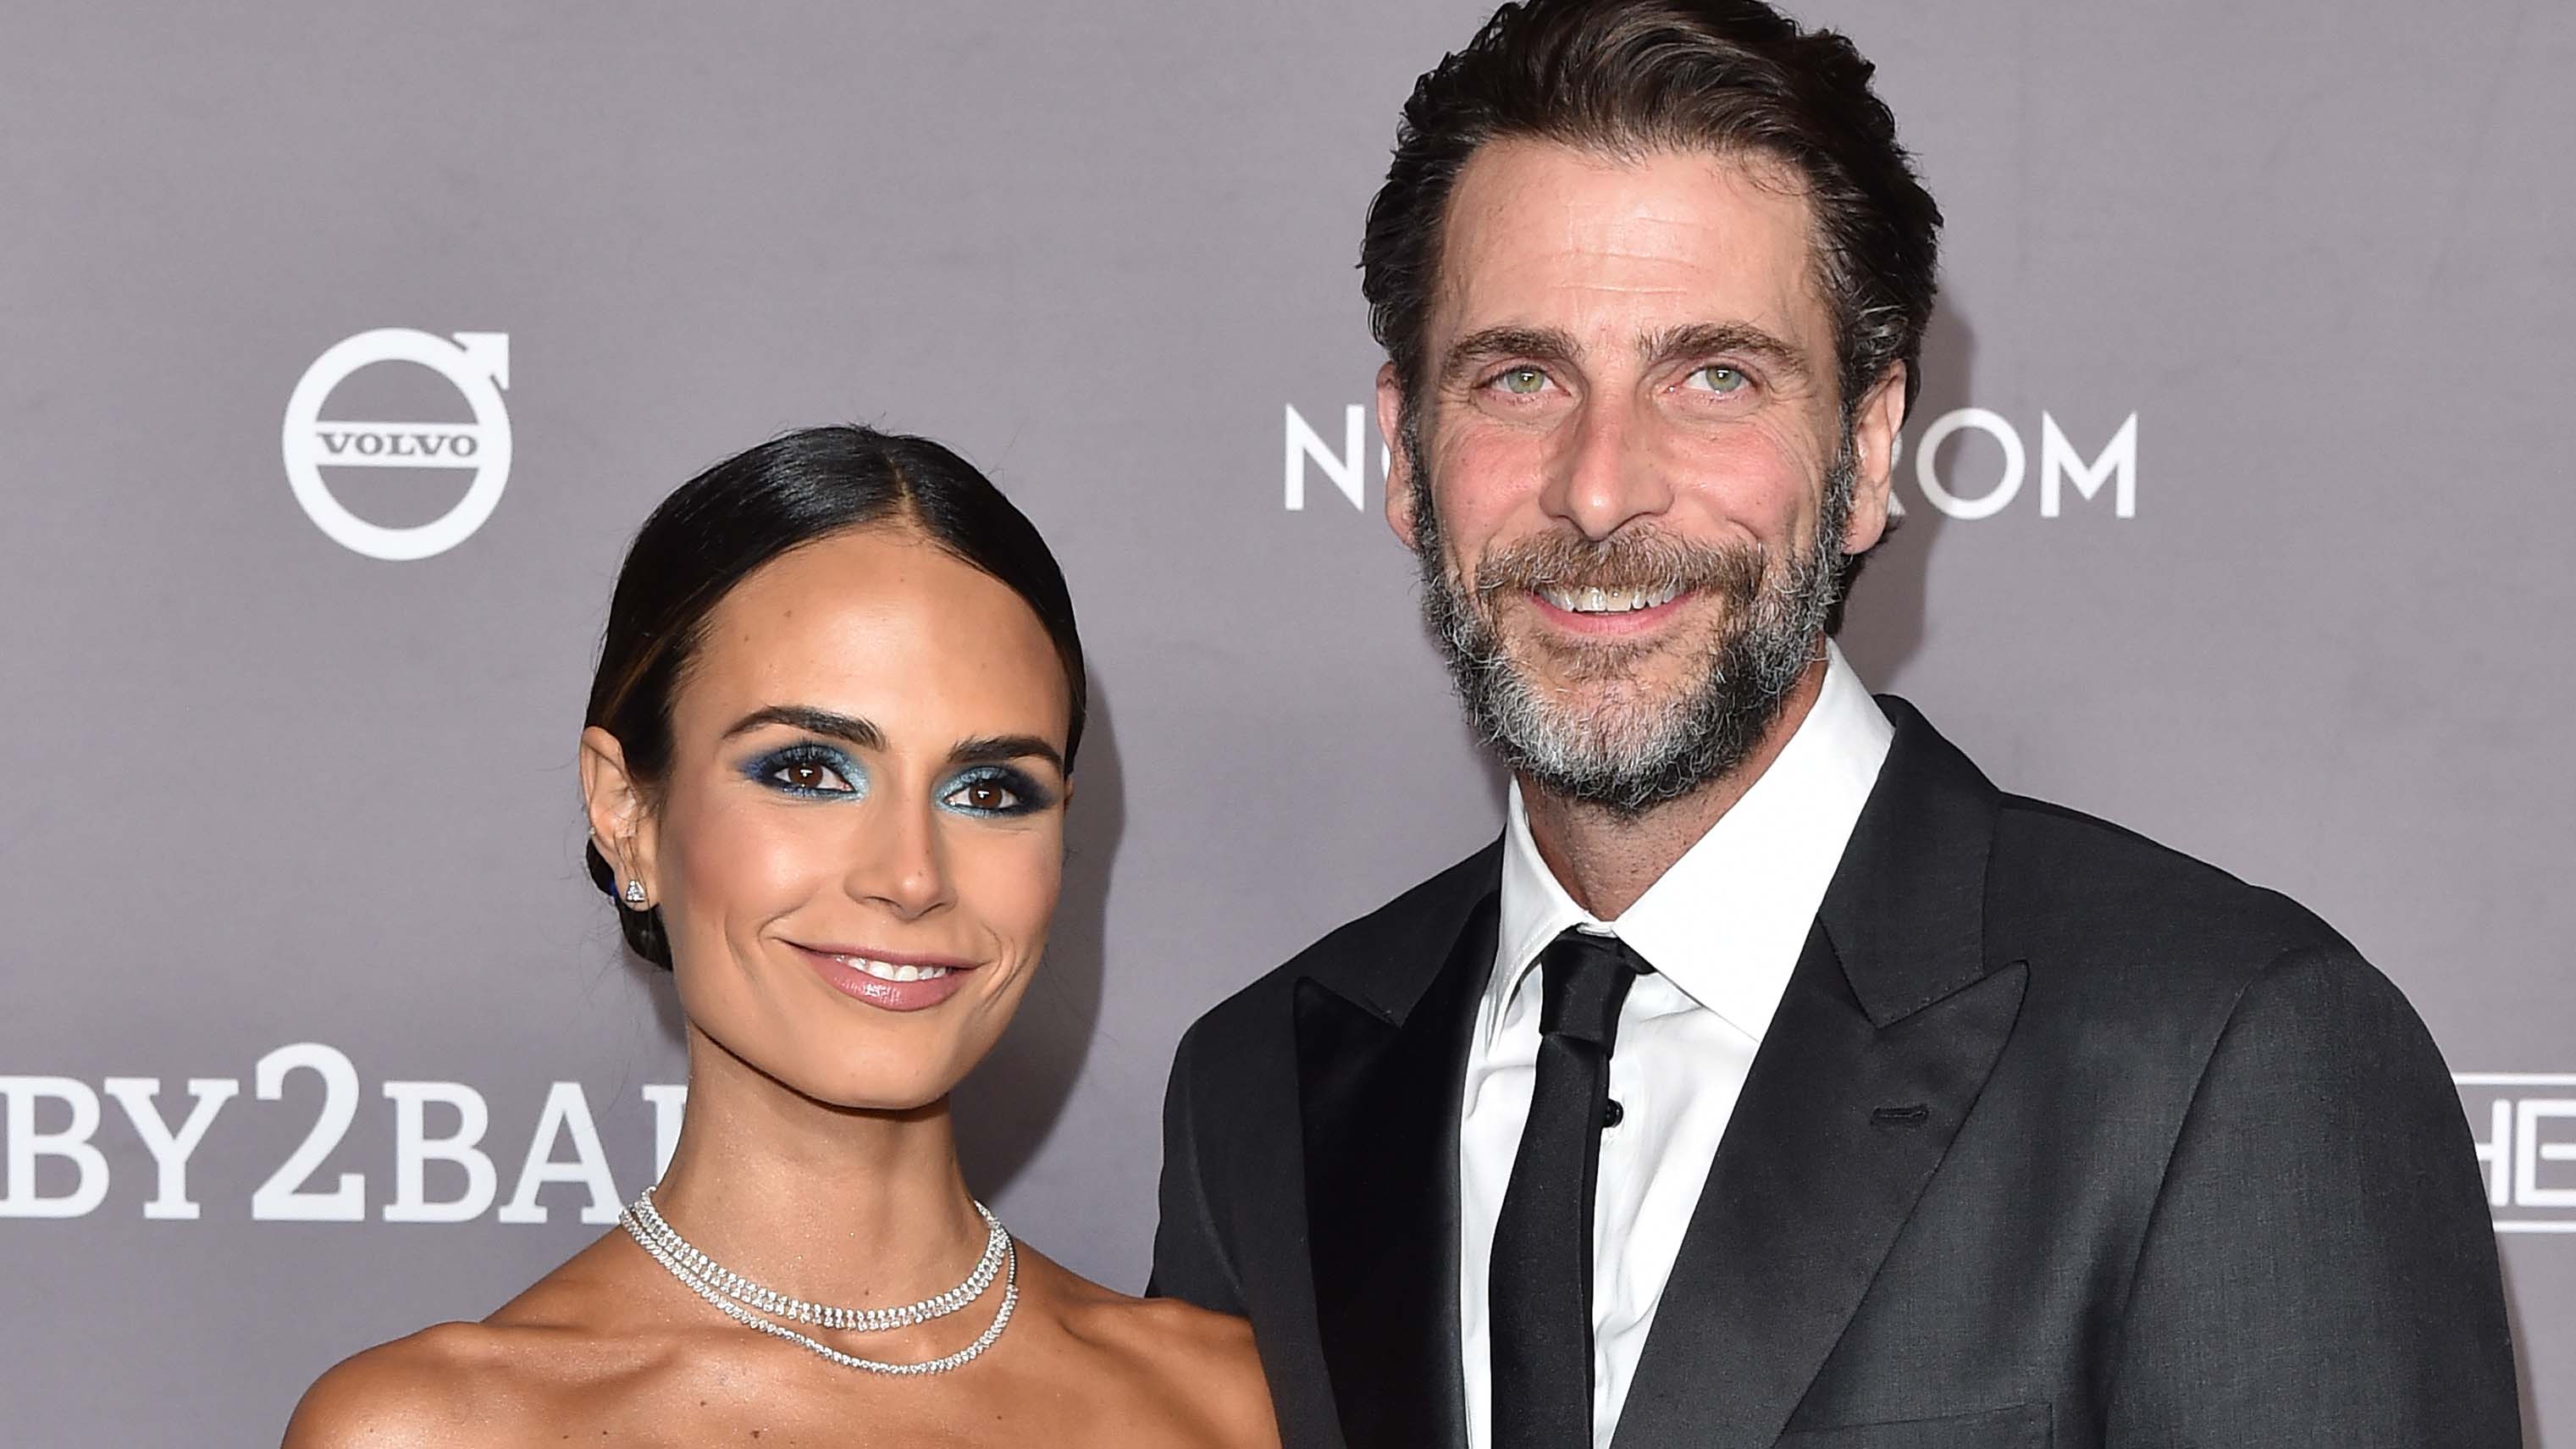 'The Fast and the Furious' star Jordana Brewster files for divorce from producer husband: reports - Fox News